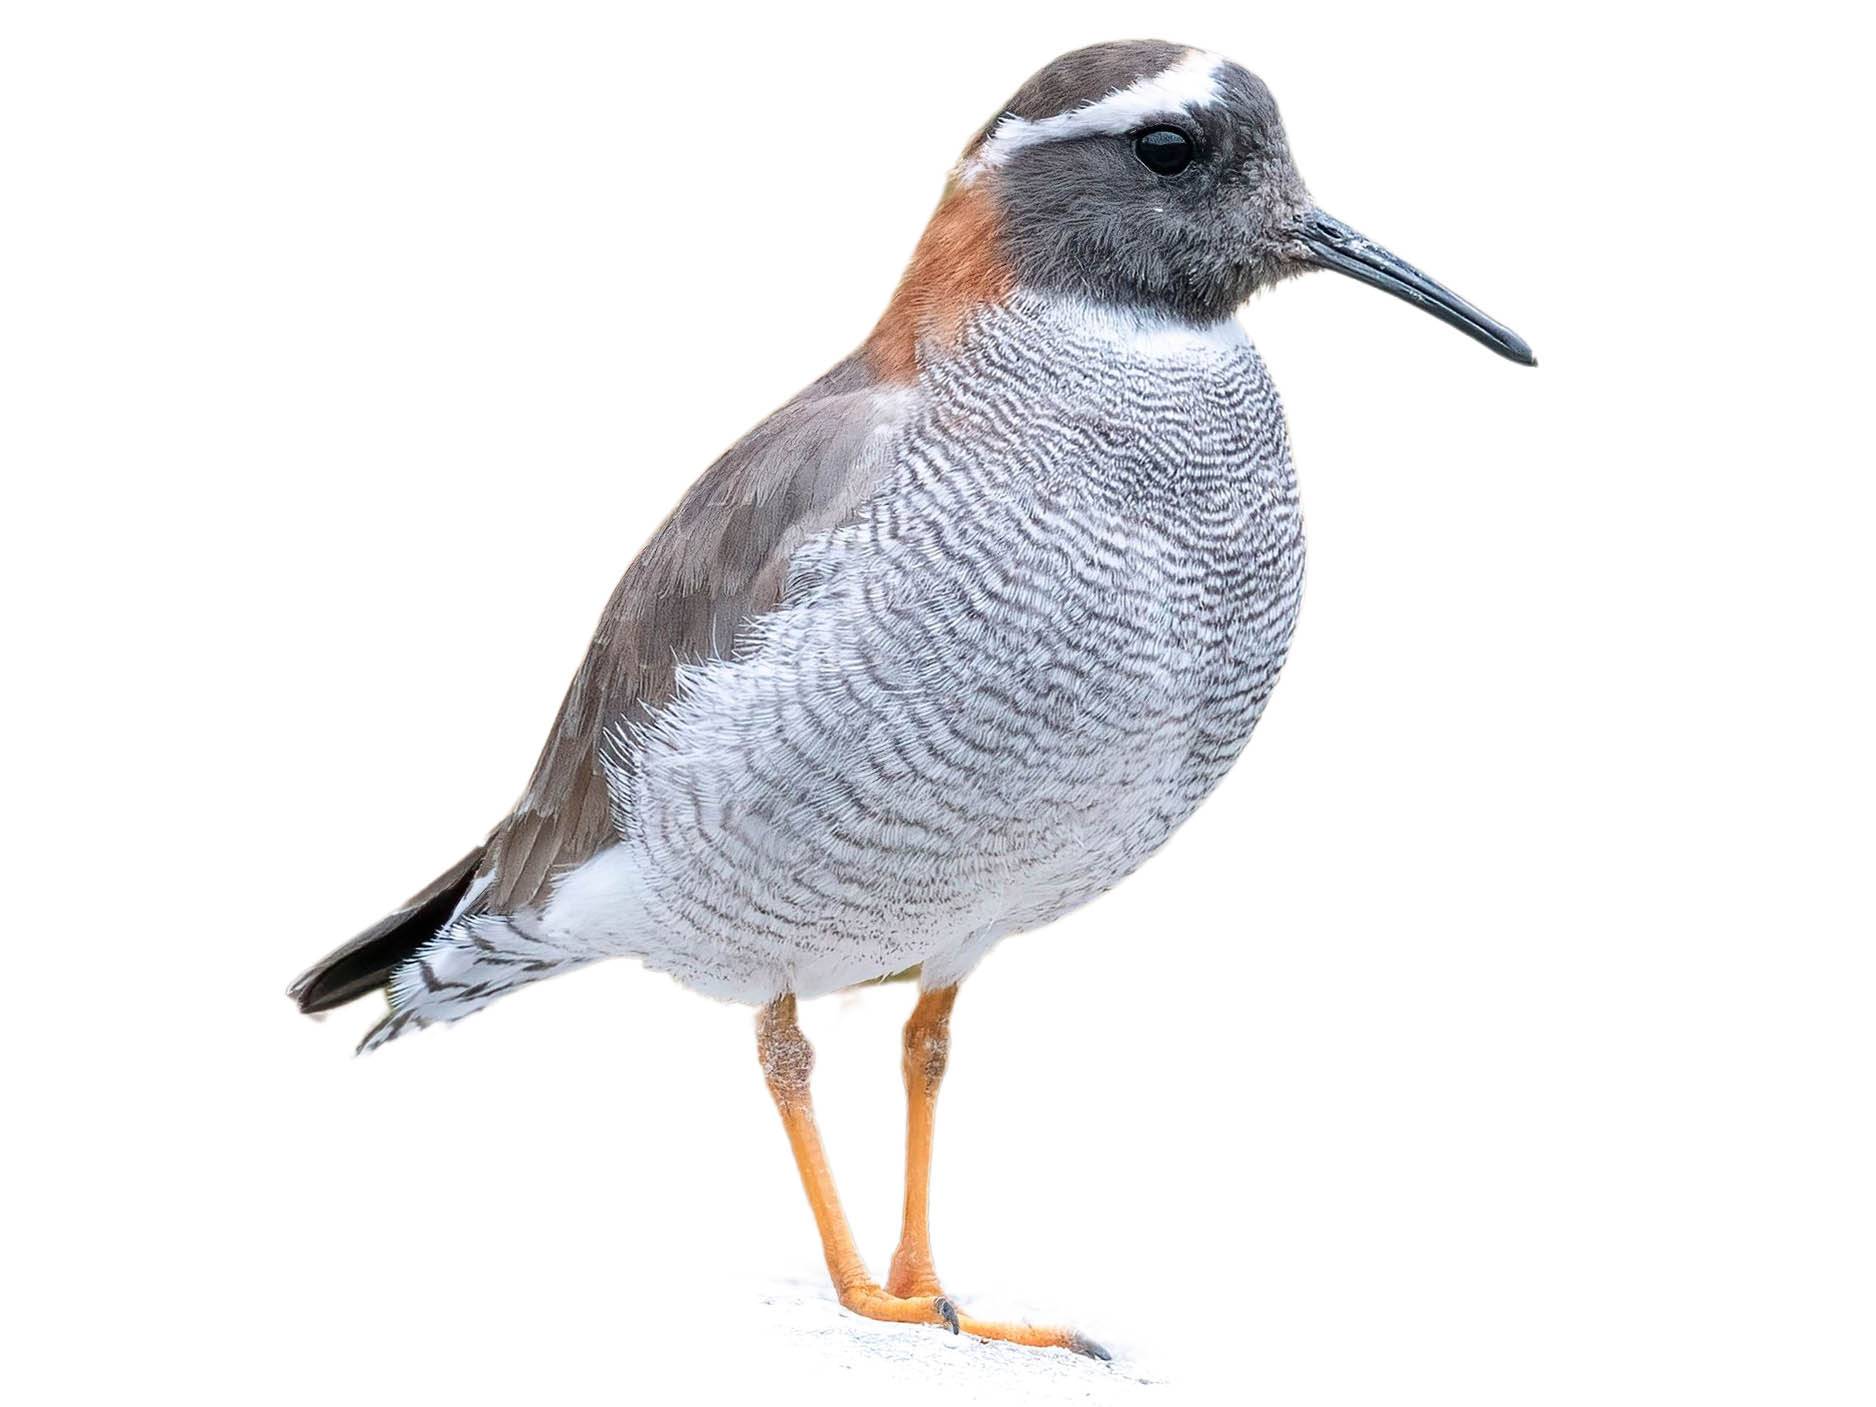 A photo of a Diademed Sandpiper-Plover (Phegornis mitchellii)